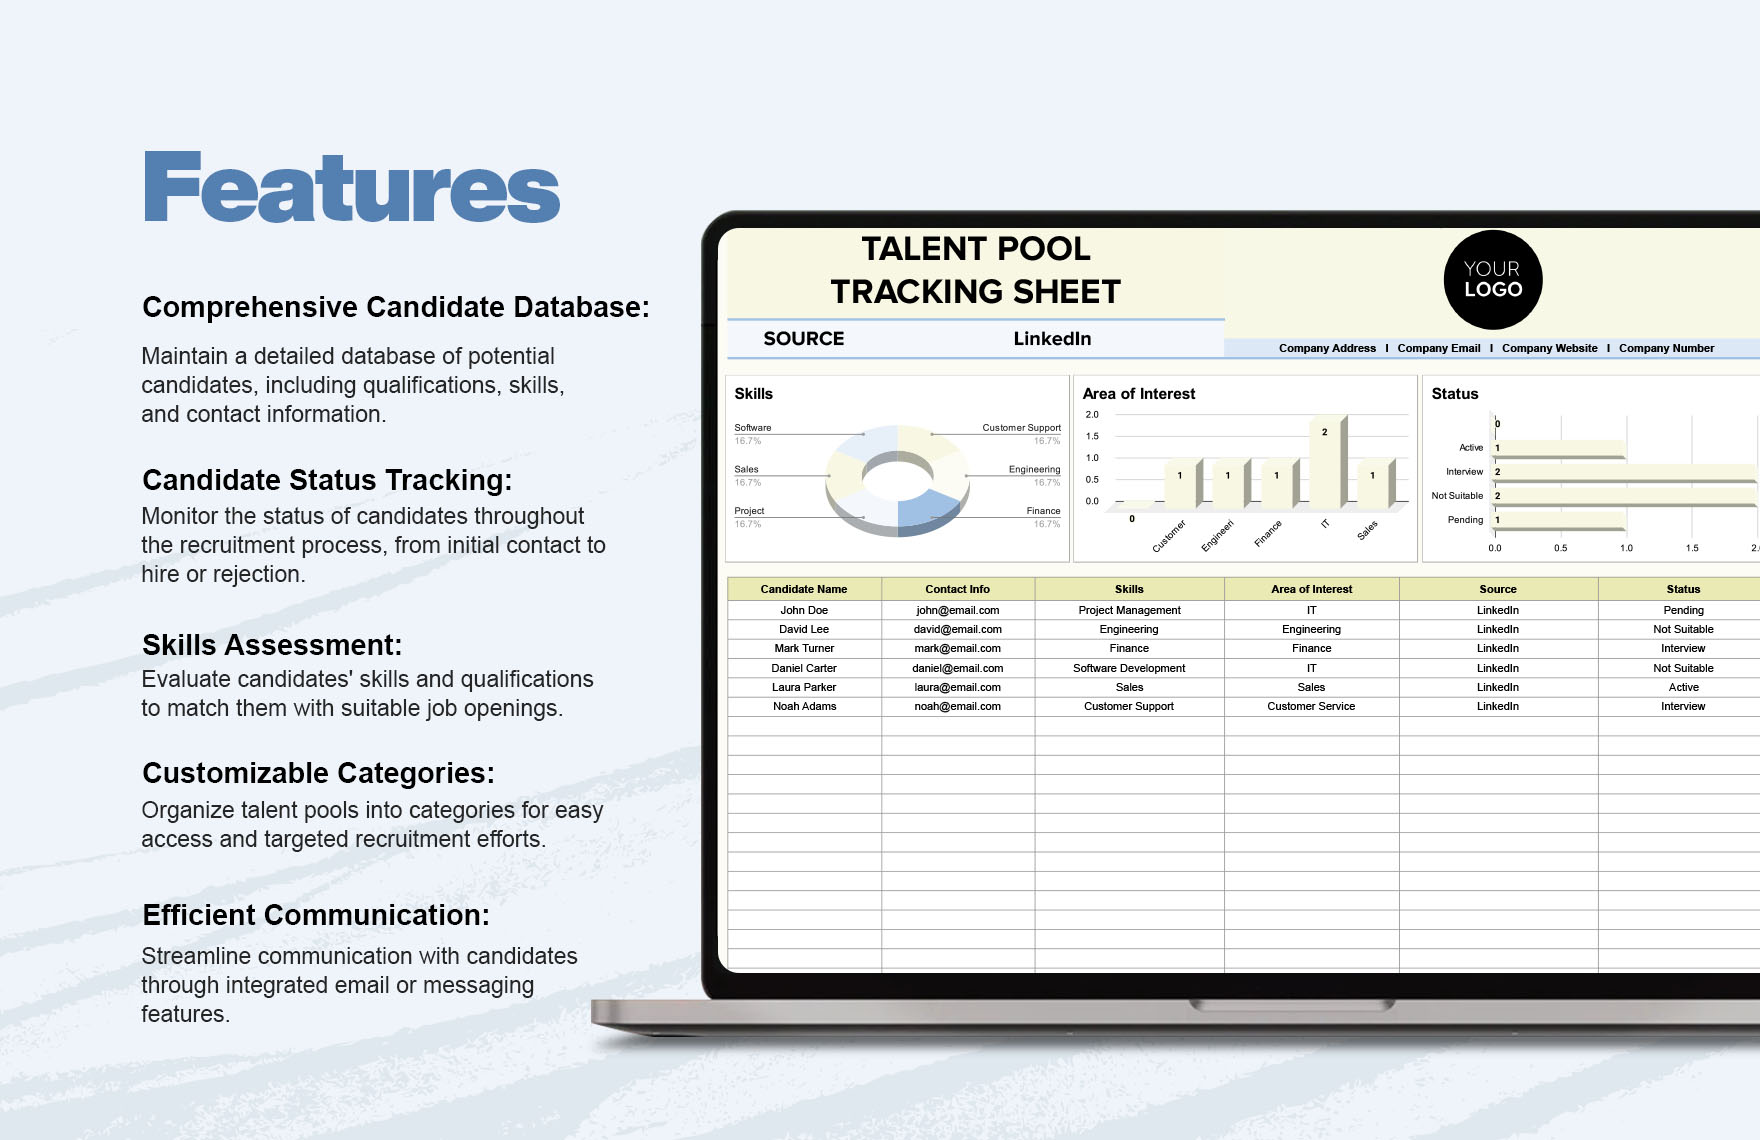 Talent Pool Tracking Sheet HR Template